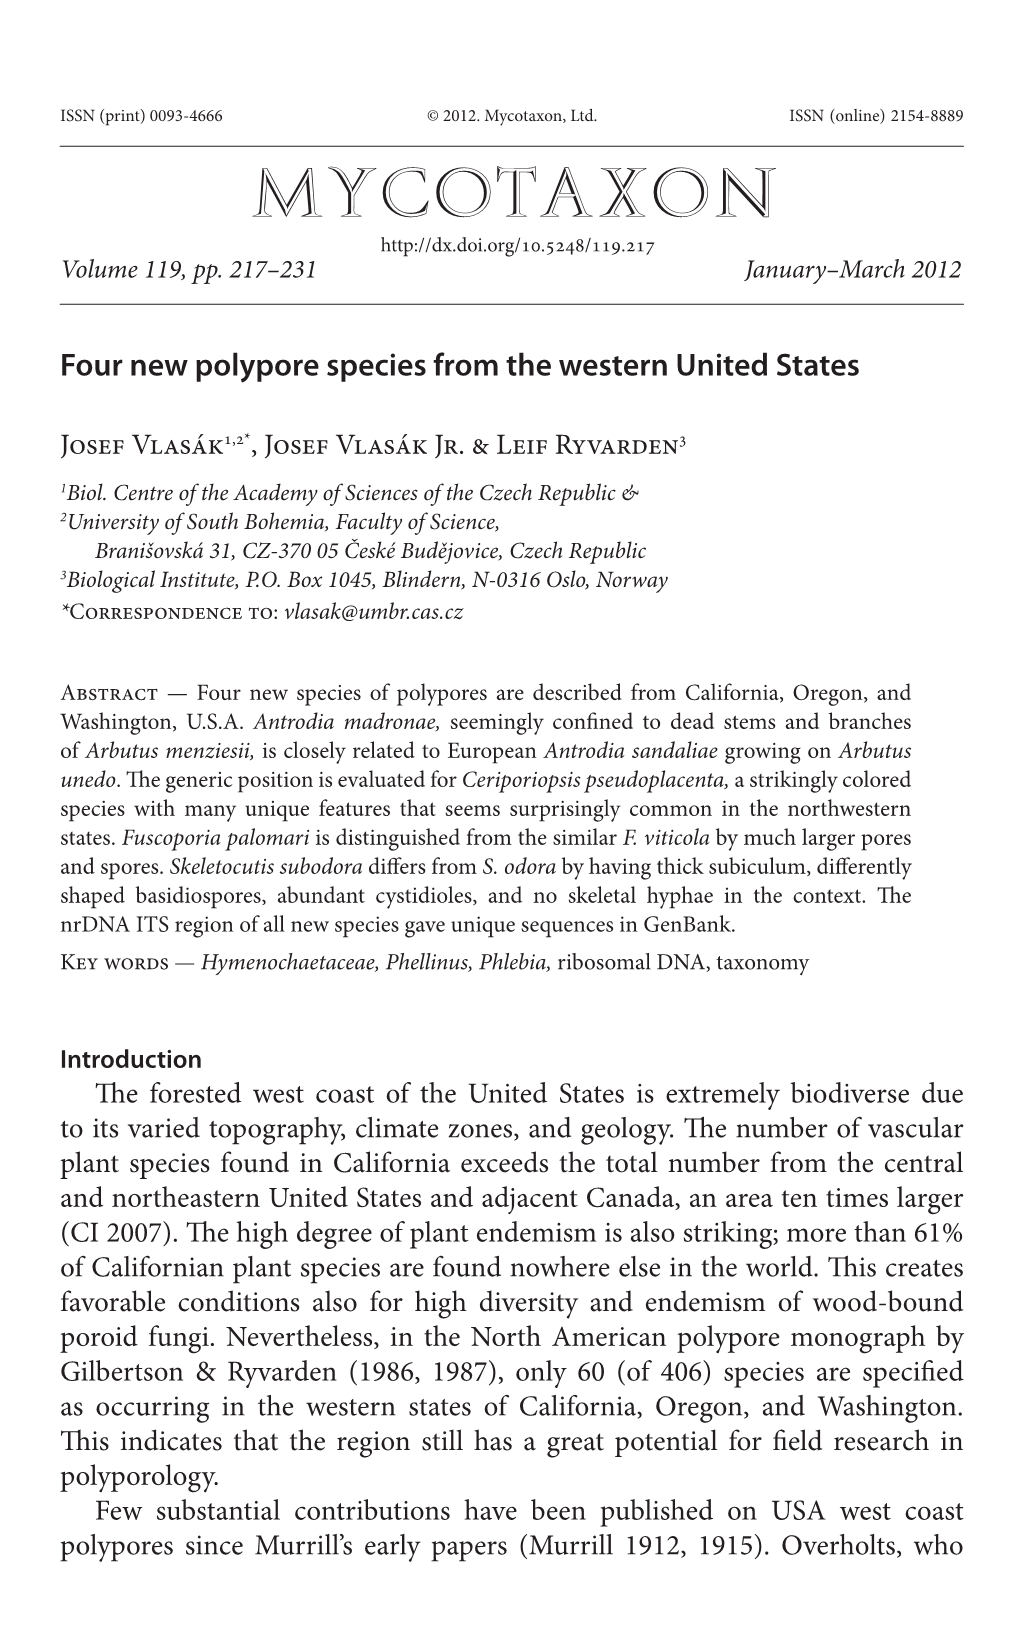 Four New Polypore Species from the Western United States